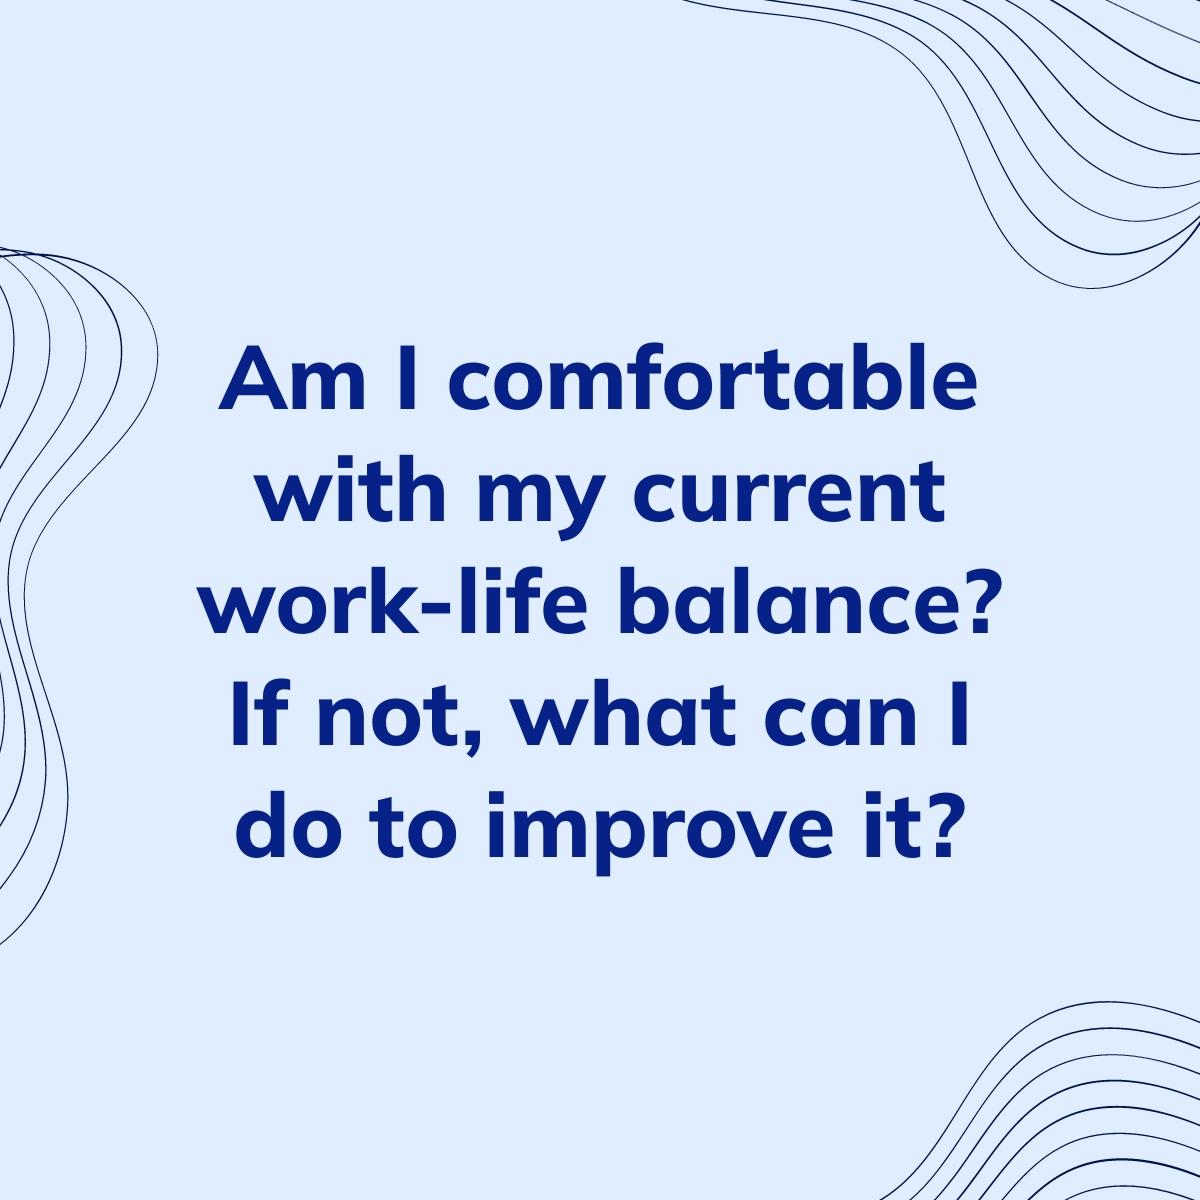 Journal Prompt: Am I comfortable with my current work-life balance? If not, what can I do to improve it?